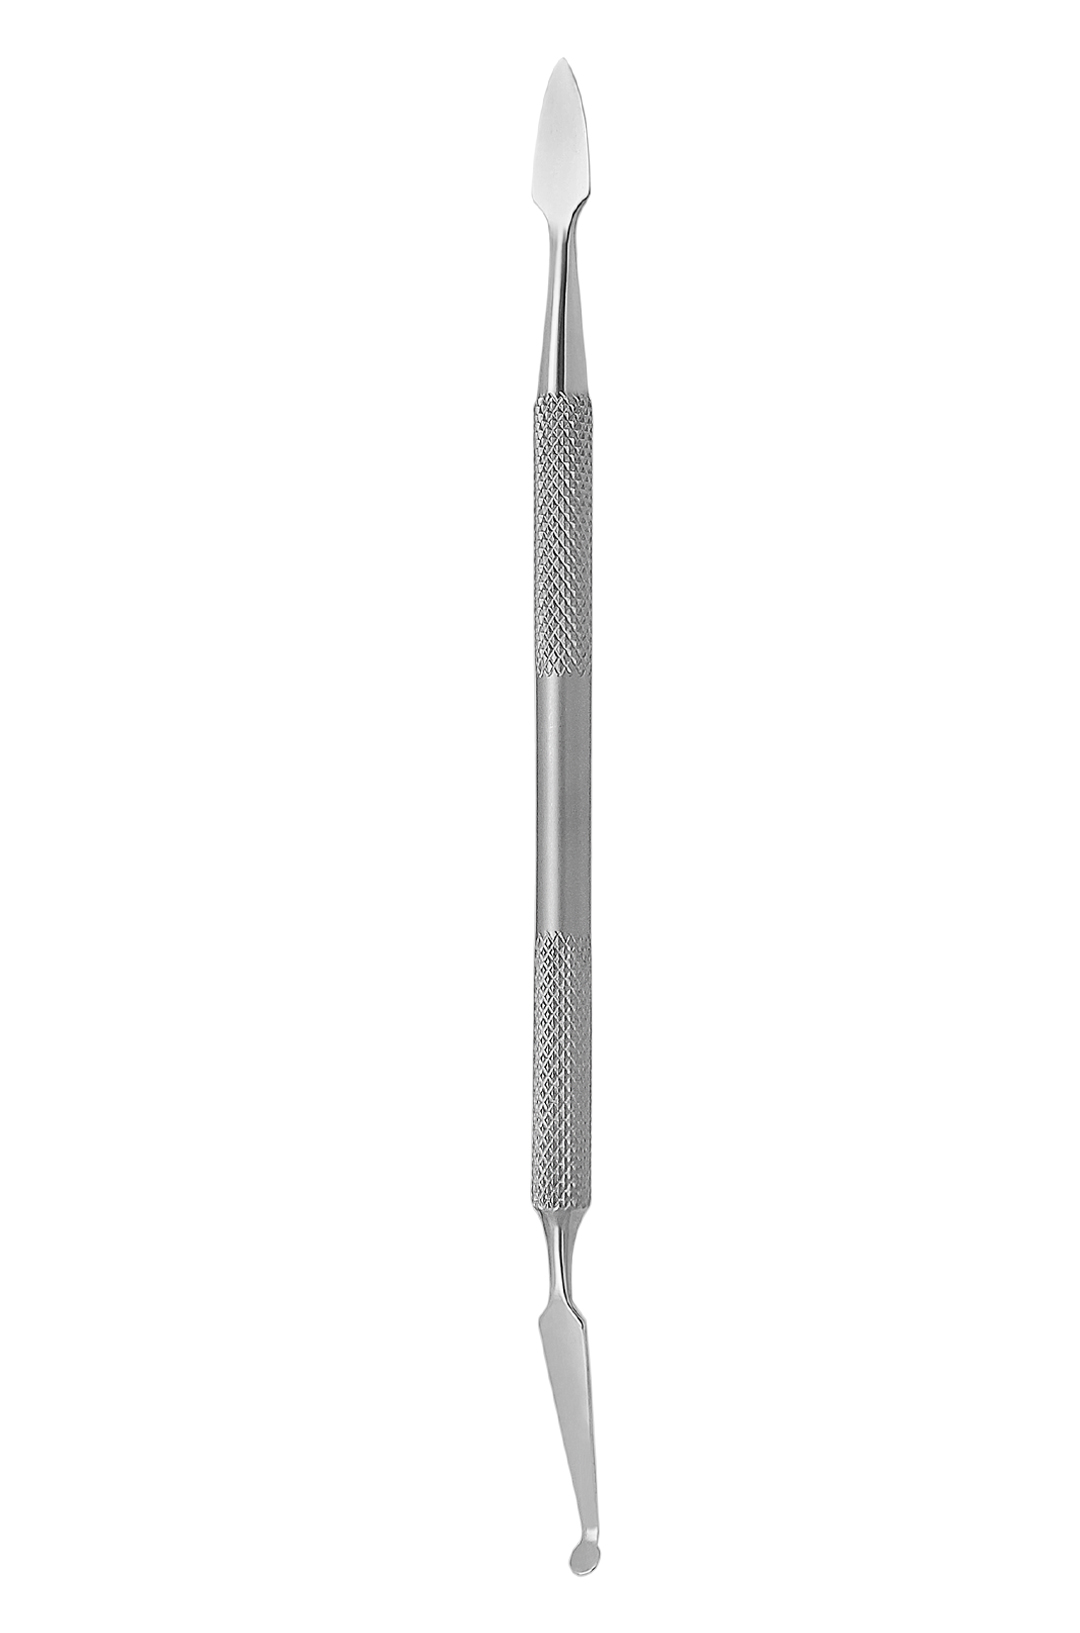 Excellent cuticle pusher